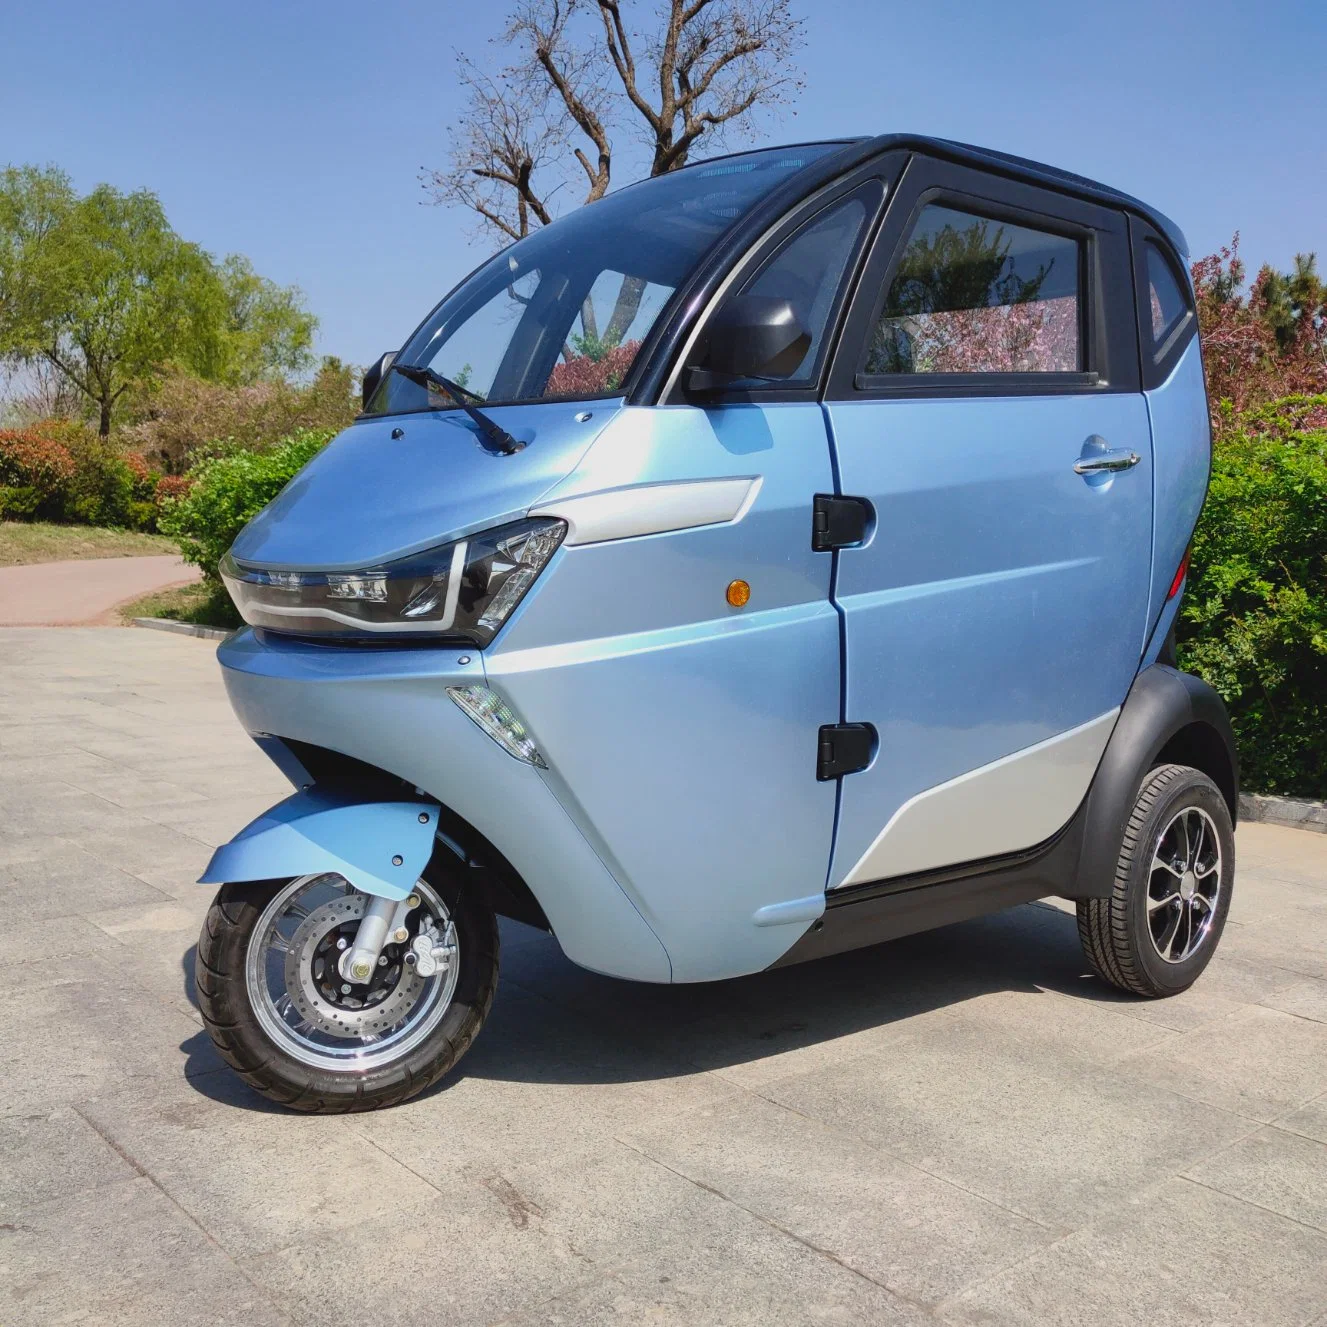 EEC L2e Mobility Motor 3 Wheel Trike Electric with Closed Cabin